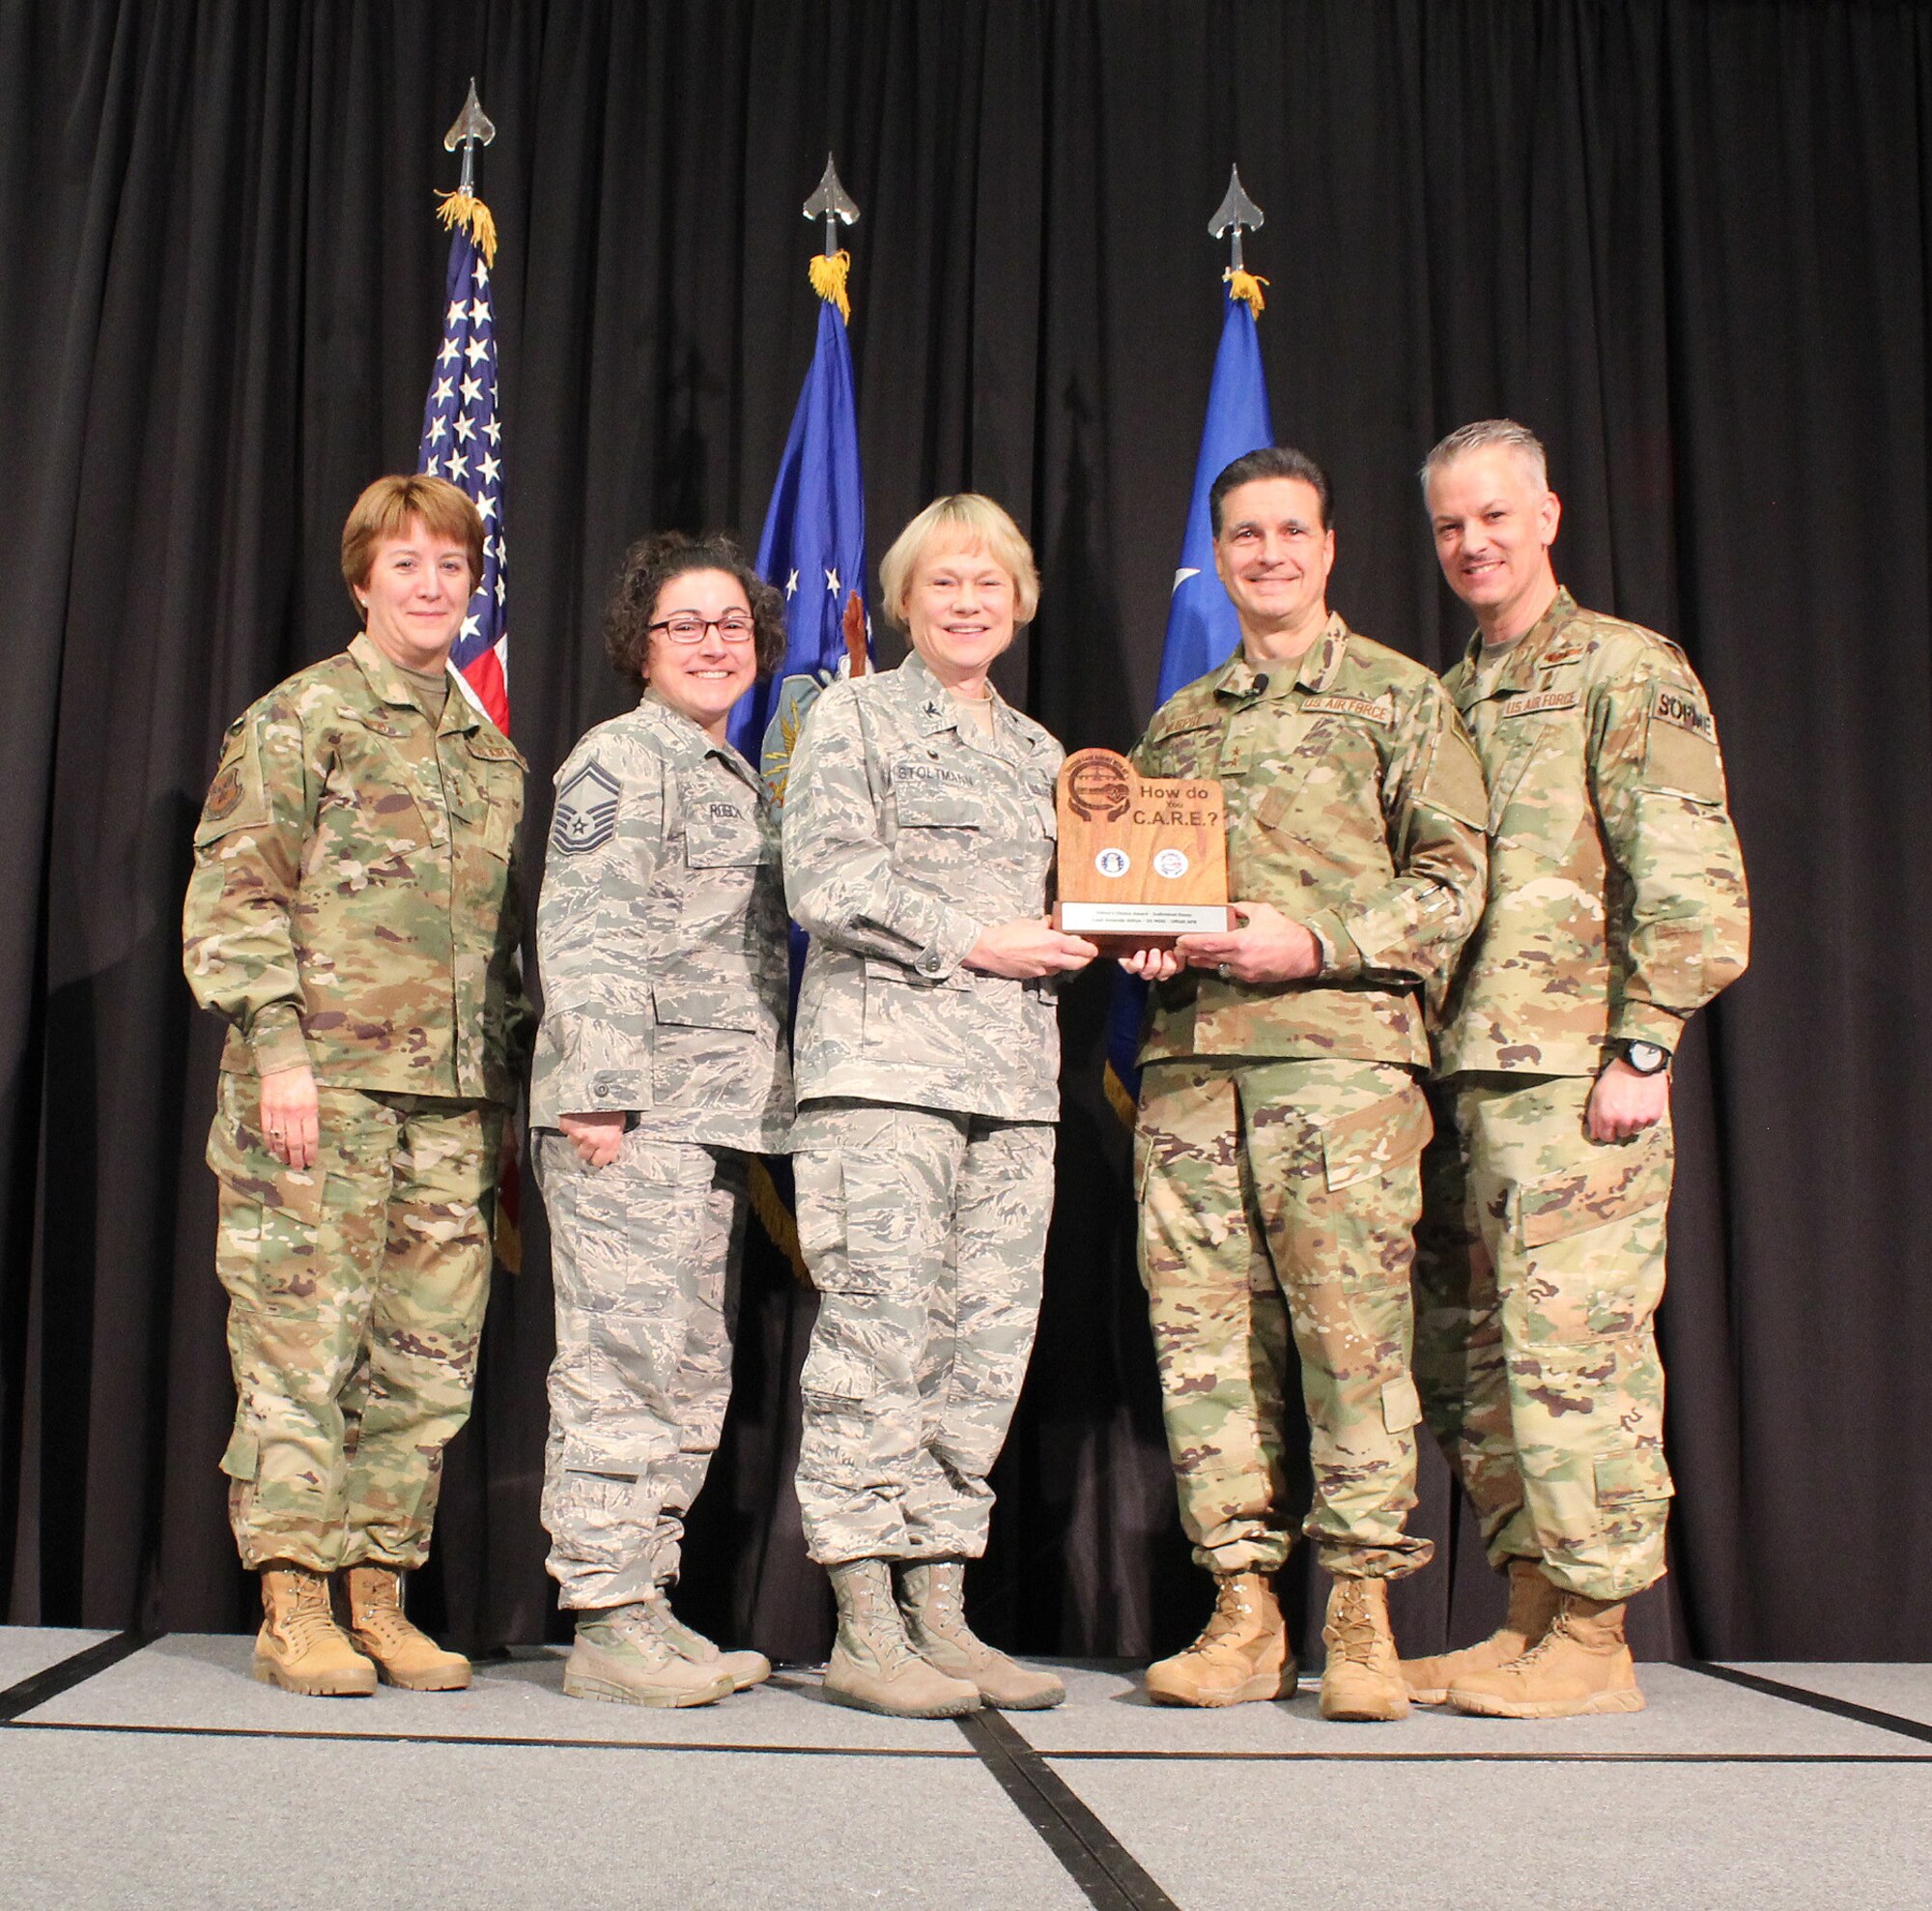 U.S Air Force Lt. Gen. Dorothy Hogg, Air Force Surgeon General, U.S. Air Force Maj. Gen. (Dr.) Sean L. Murphy, Deputy Surgeon General, and Chief Master Sgt. G. Steve Cum, Chief, Medical Enlisted Force and Enlisted Corps Chief, pose with U.S. Air Force Col. Judy Stoltmann and Senior Master Sgt. Holly Roschel, Offutt Air Force Base, Nebraska, during the 2018 Air Force Medical Service Senior Leadership Workshop at the National Conference Center in Leesburg, Va., Dec. 5, 2018. Stoltmann and Roschel accepted the Editor’s Choice Award (Individual Essay) for the Trusted Care “How Do You C.A.R.E.” campaign on behalf of U.S. Air Force Capt. Amanda Atitya. (U.S. Air Force photo by Josh Mahler)